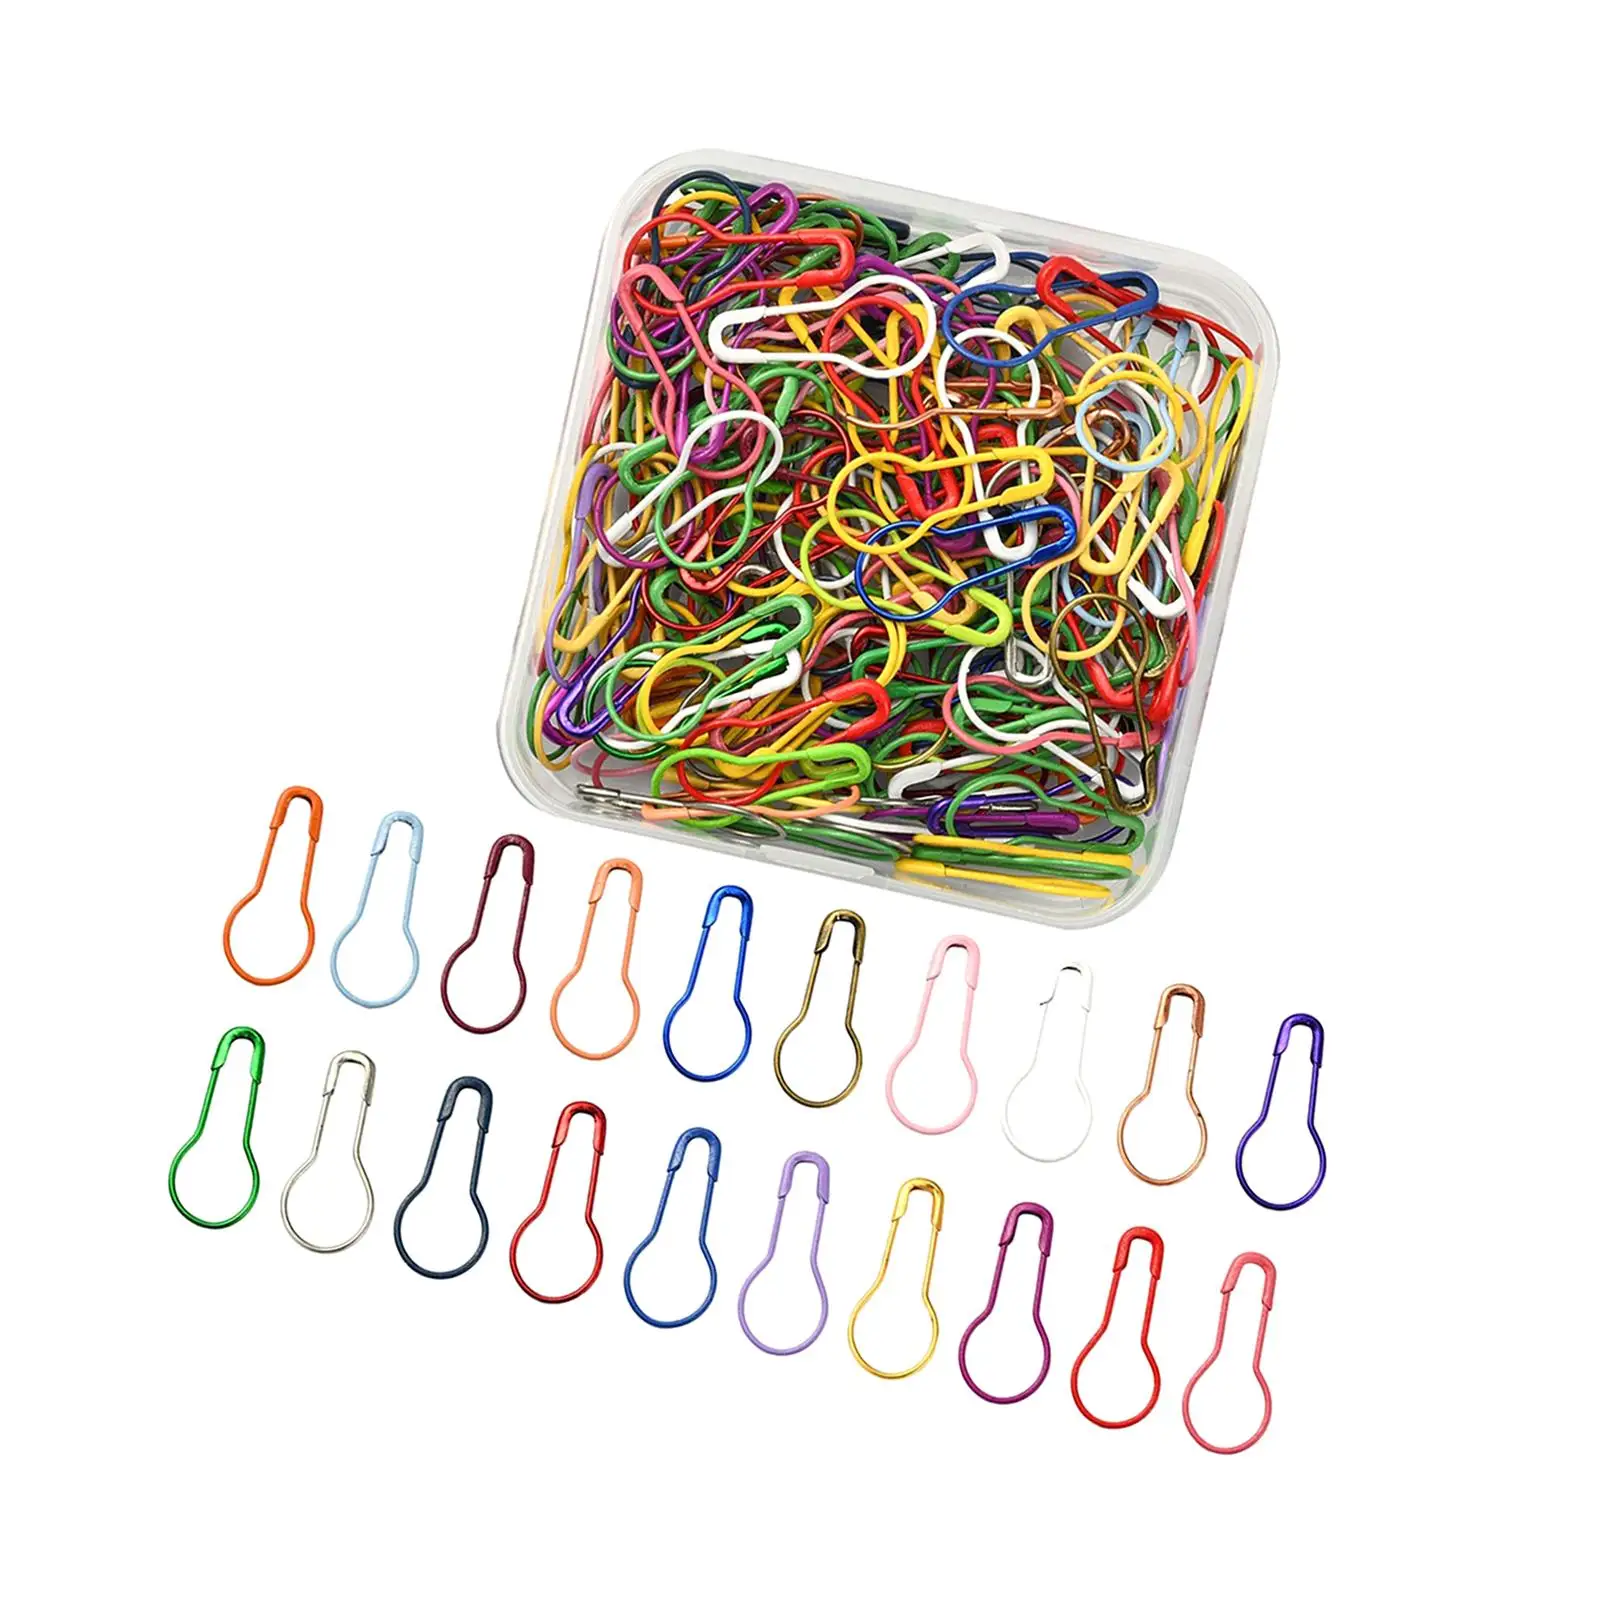 200x Safety Pins Knitting Quilting Crochet Storage Box Bulb Stitch Markers for Blanket Clothes Crocheting Clothing Tag Making